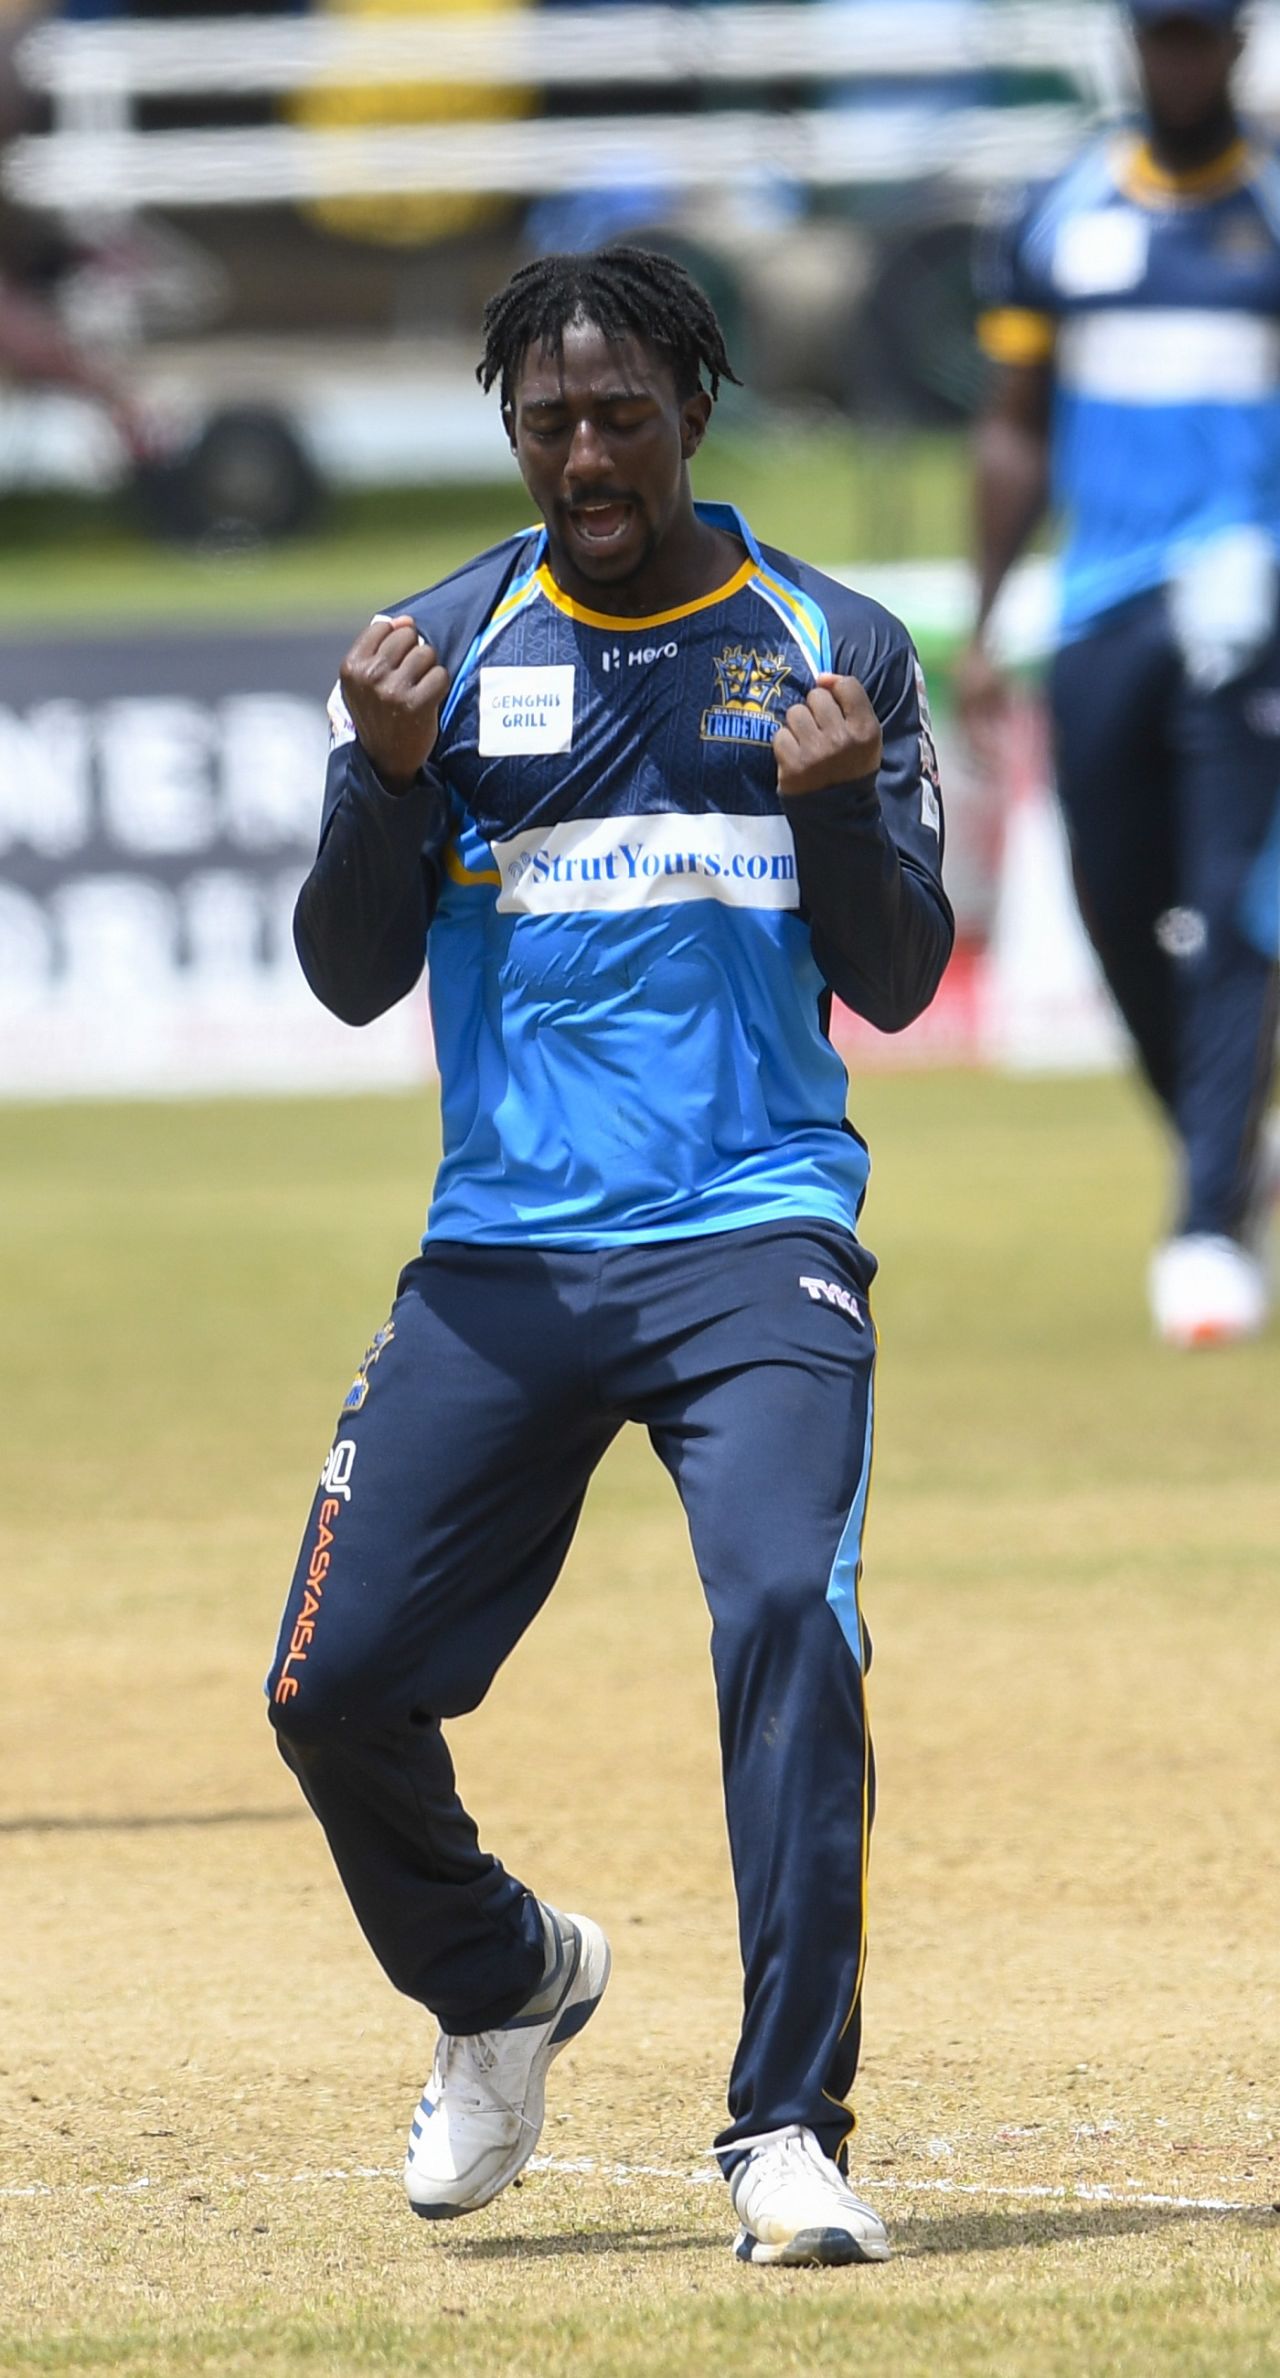 Hayden Walsh Jr. claimed 3 for 19 in his spell of four overs, Barbados Tridents v St Lucia Zouks, CPL 2020, Port Of Spain, August 30, 2020